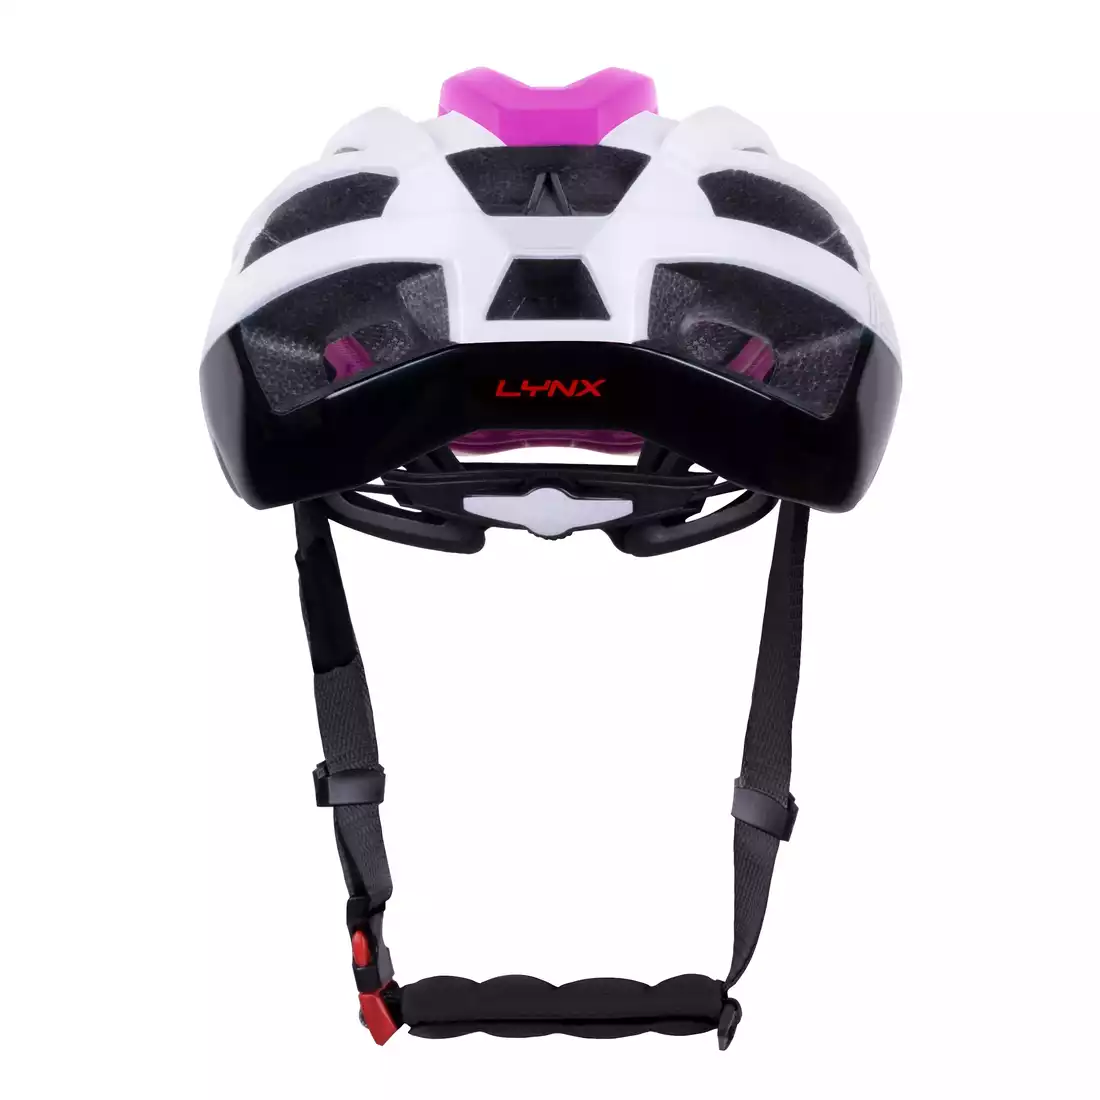 FORCE LYNX Bicycle helmet, white and pink